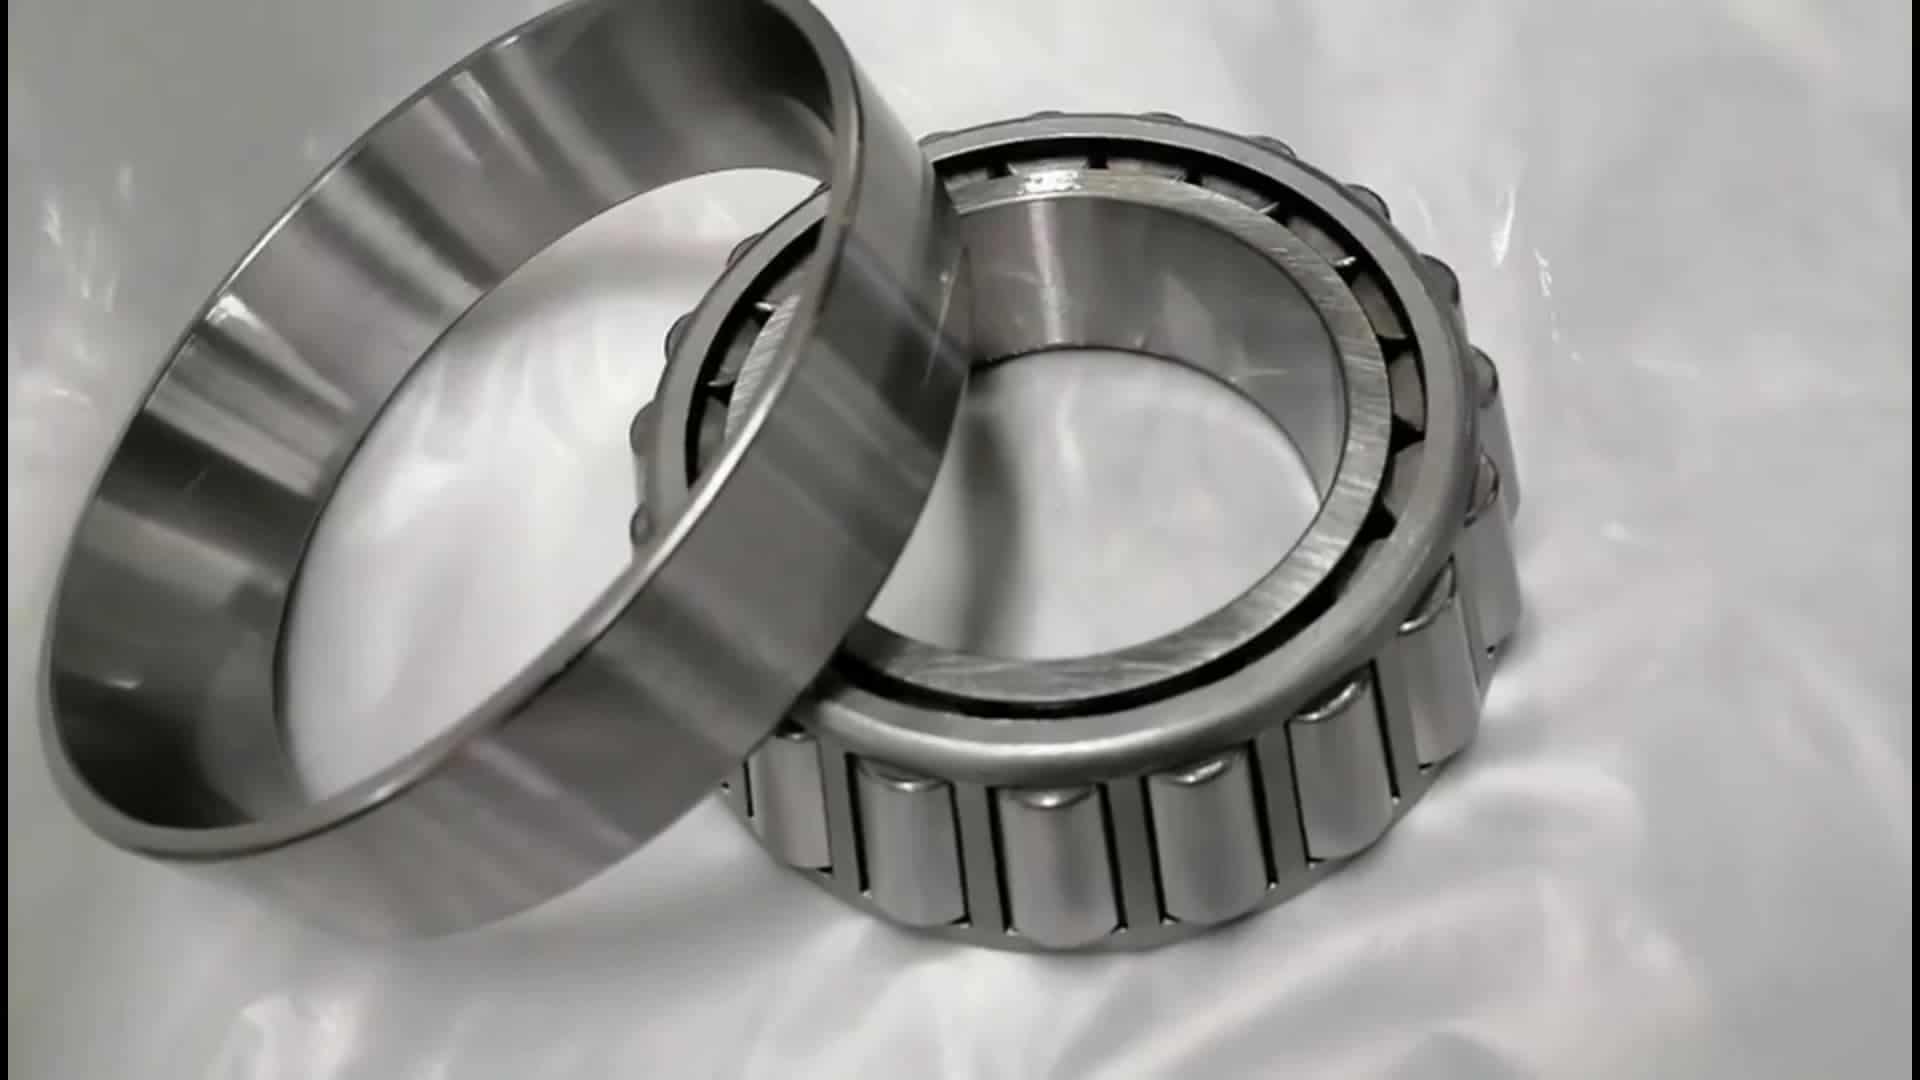 795/792 95475/95925 hh228340/hh228310 inch tapered roller bearing